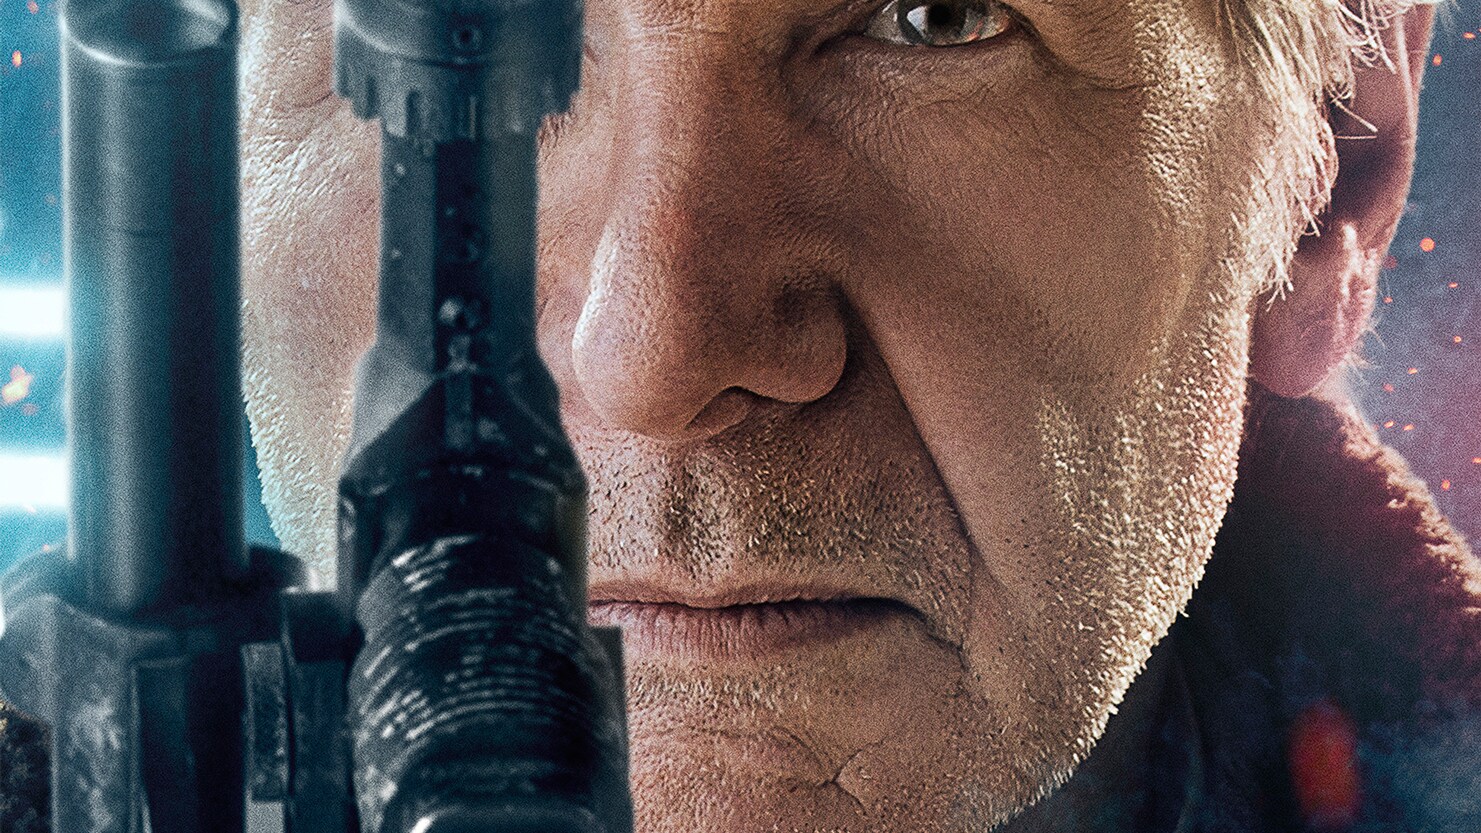 Star Wars: The Force Awakens Character Posters Revealed